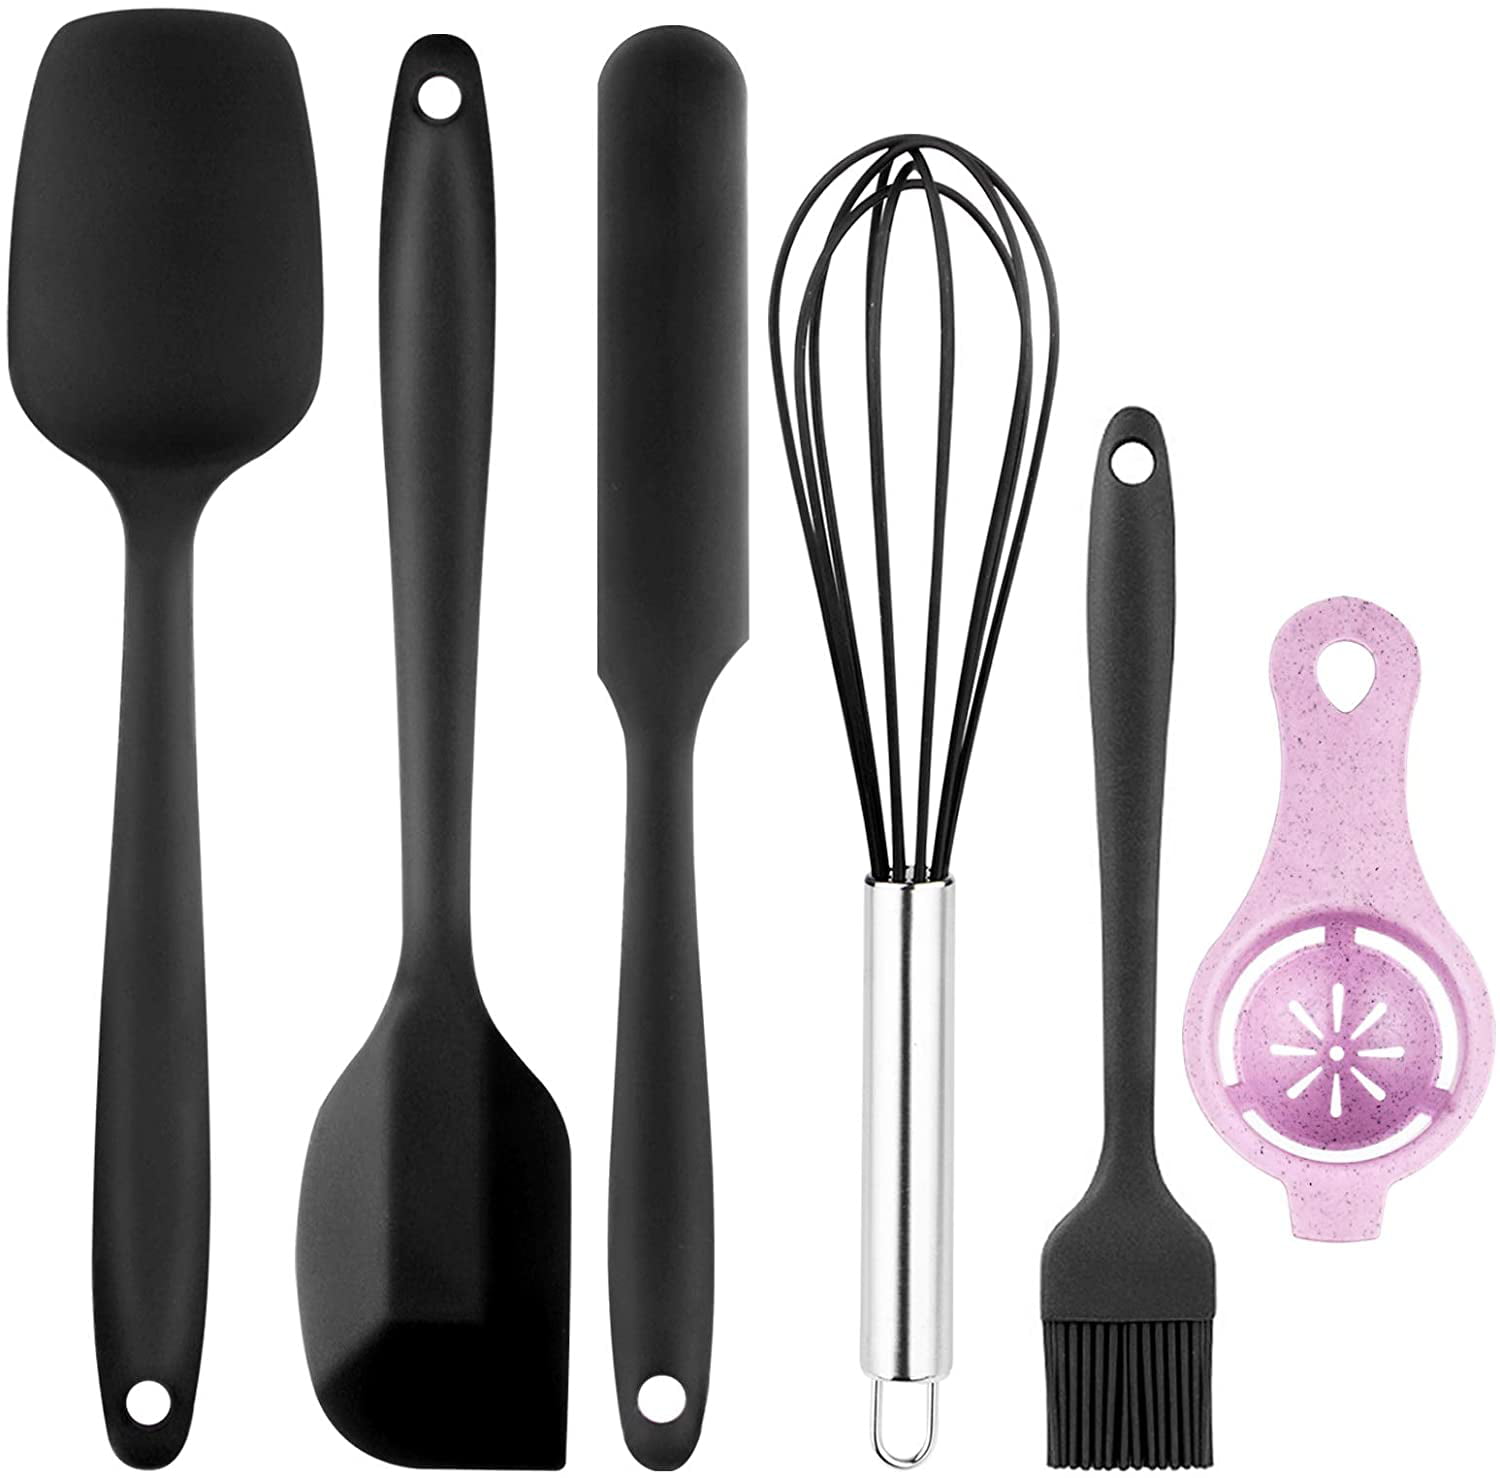 No Smell Kitchen Utensils mix for Cooking Sredhy Heat-Resistant Silicone Cooking Utensil Set 6 Piece Silicone Spatula Set Baking and Mixing,Flexible Rubber Cooking Utensils with One Piece Design 